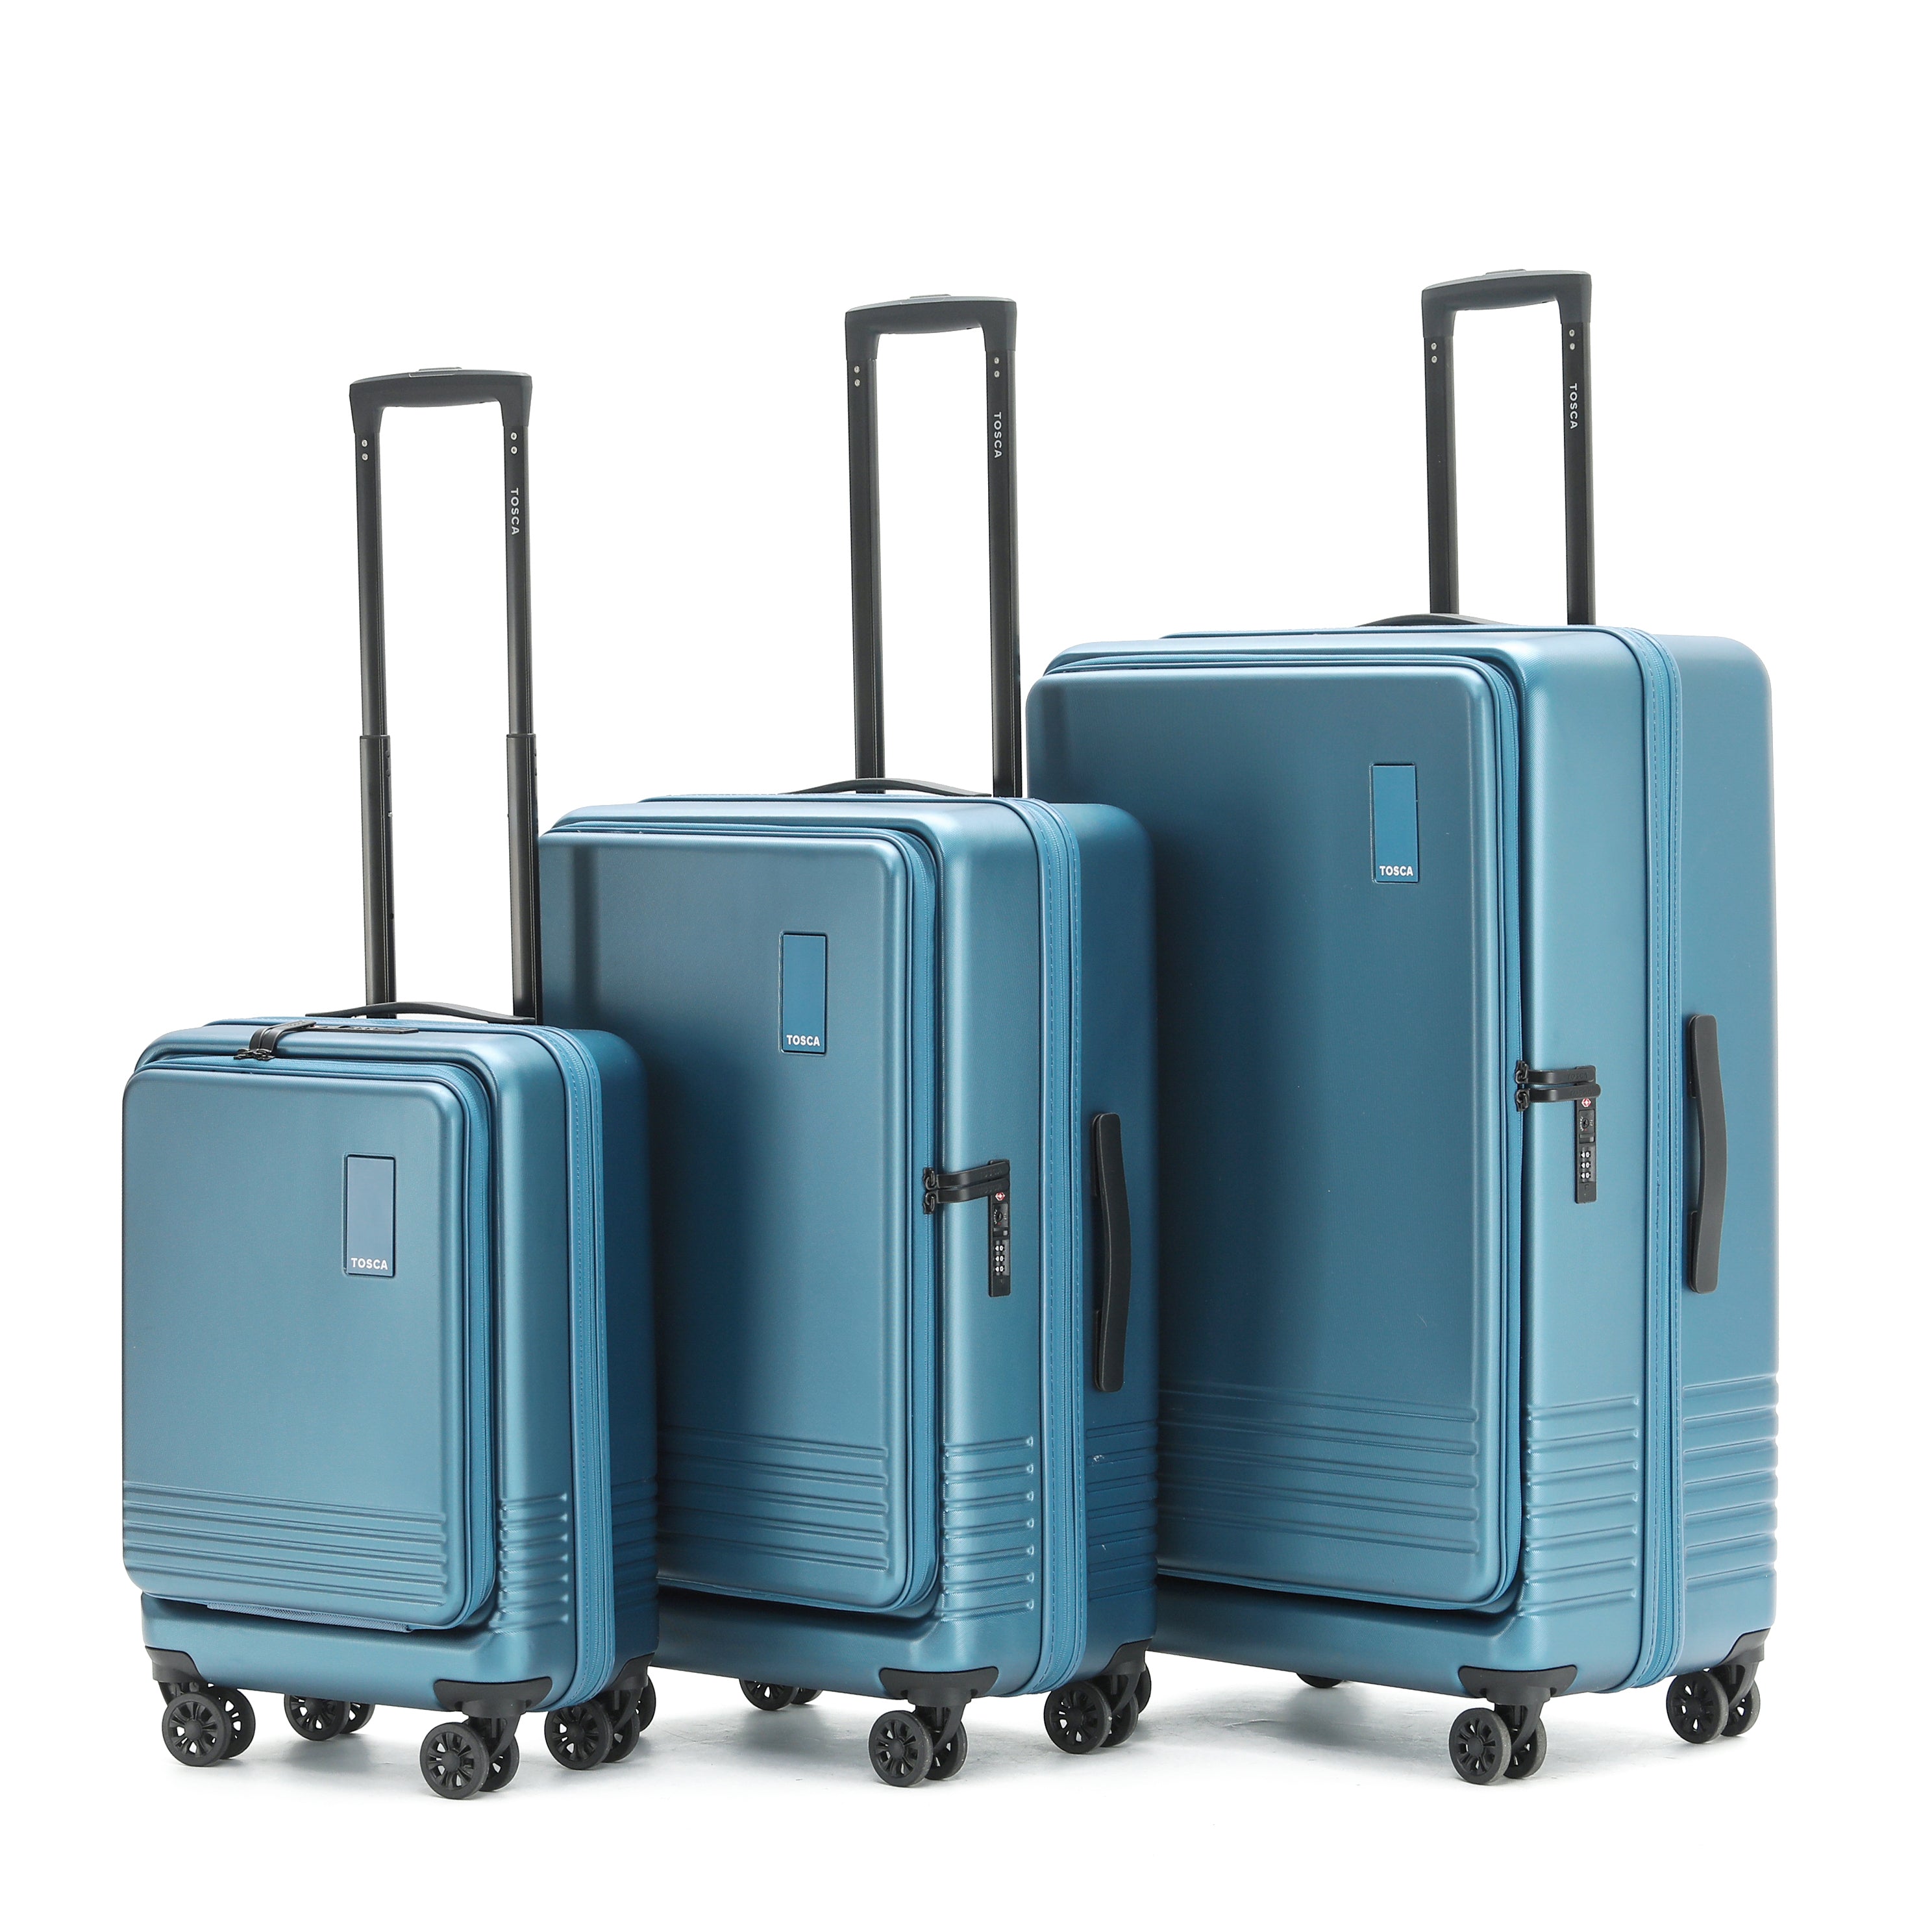 Tosca - TCA644 Horizon Front lid opening Set of 3 suitcases - Blue - 0